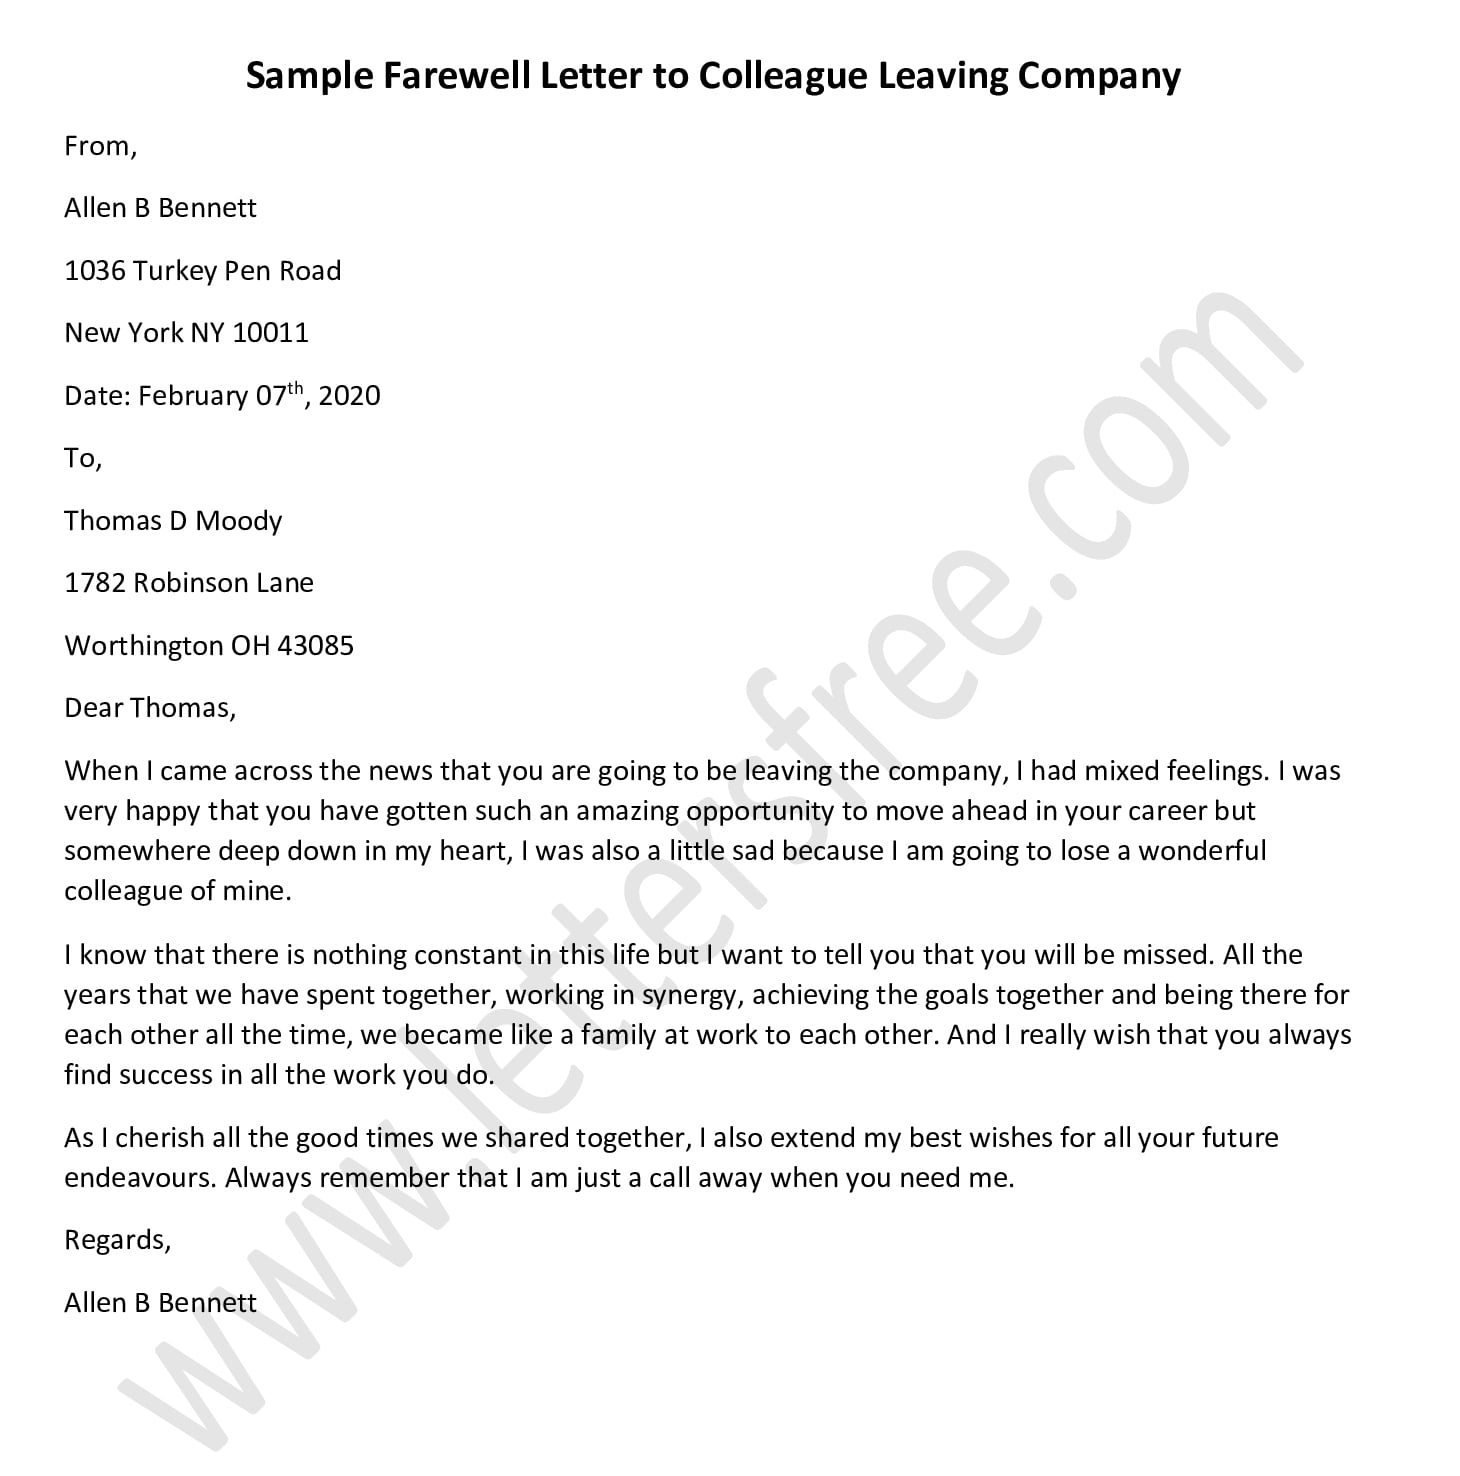 Farewell Letter to Colleague Leaving Company